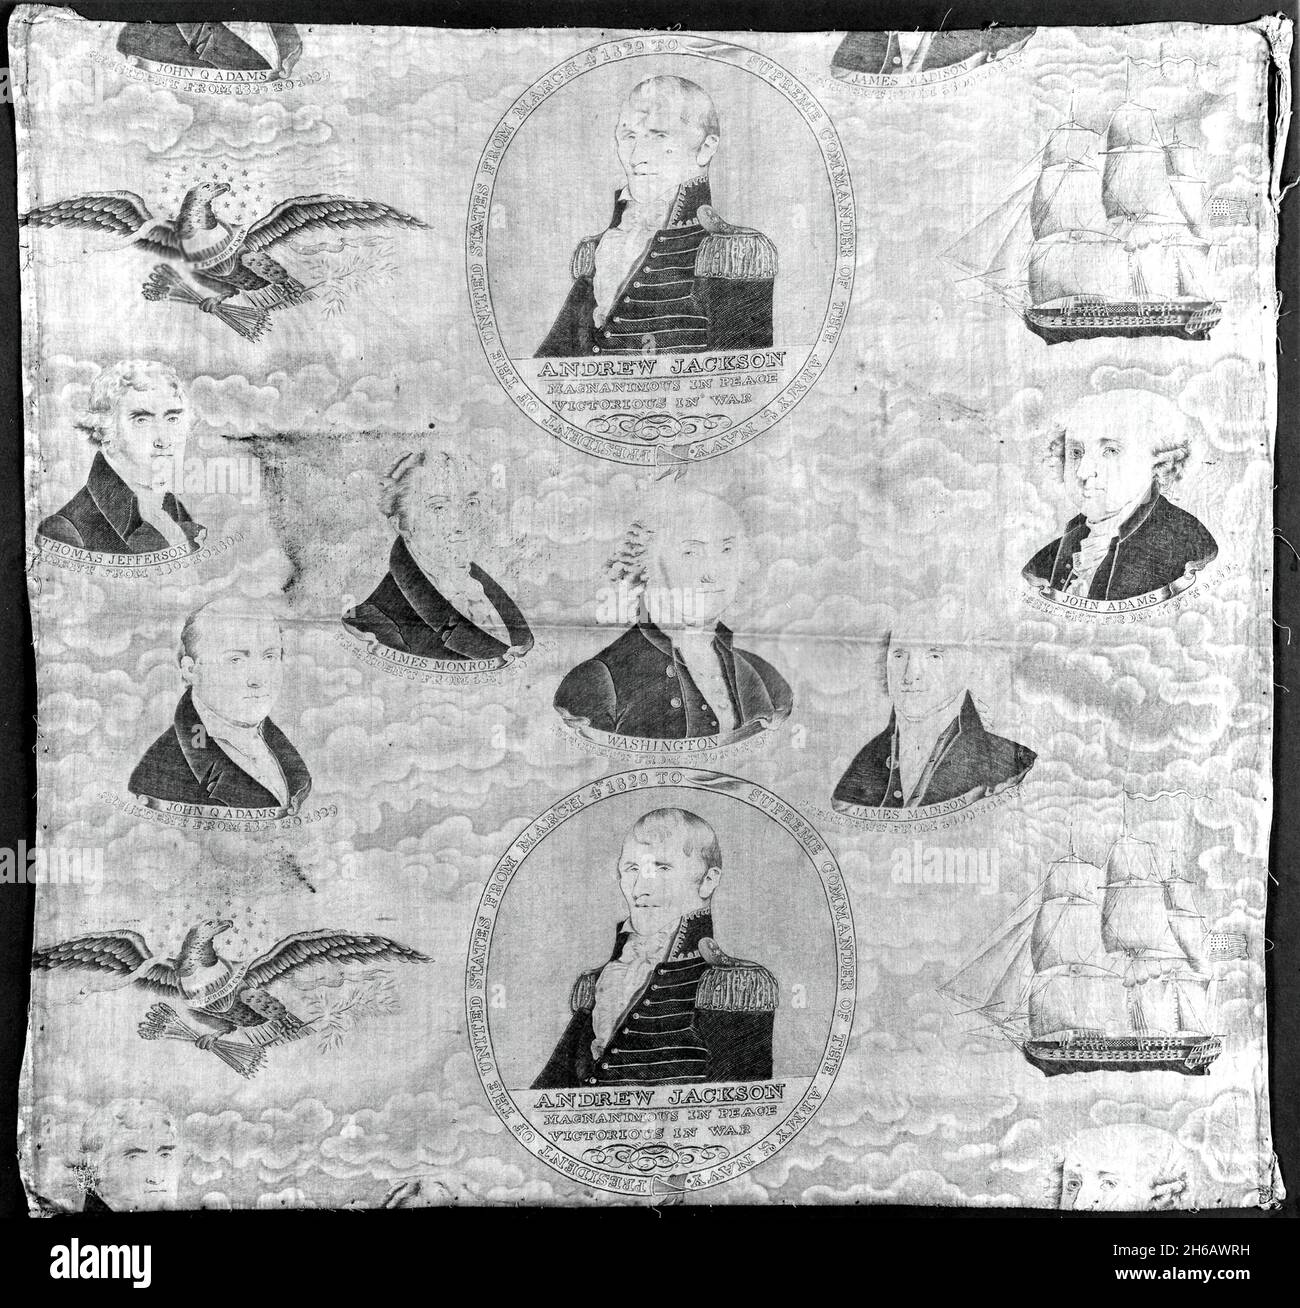 Fragment (Furnishing Fabric), England or United States, c. 1837. Portraits of US presidents with eagle and sailing ship motifs. Stock Photo